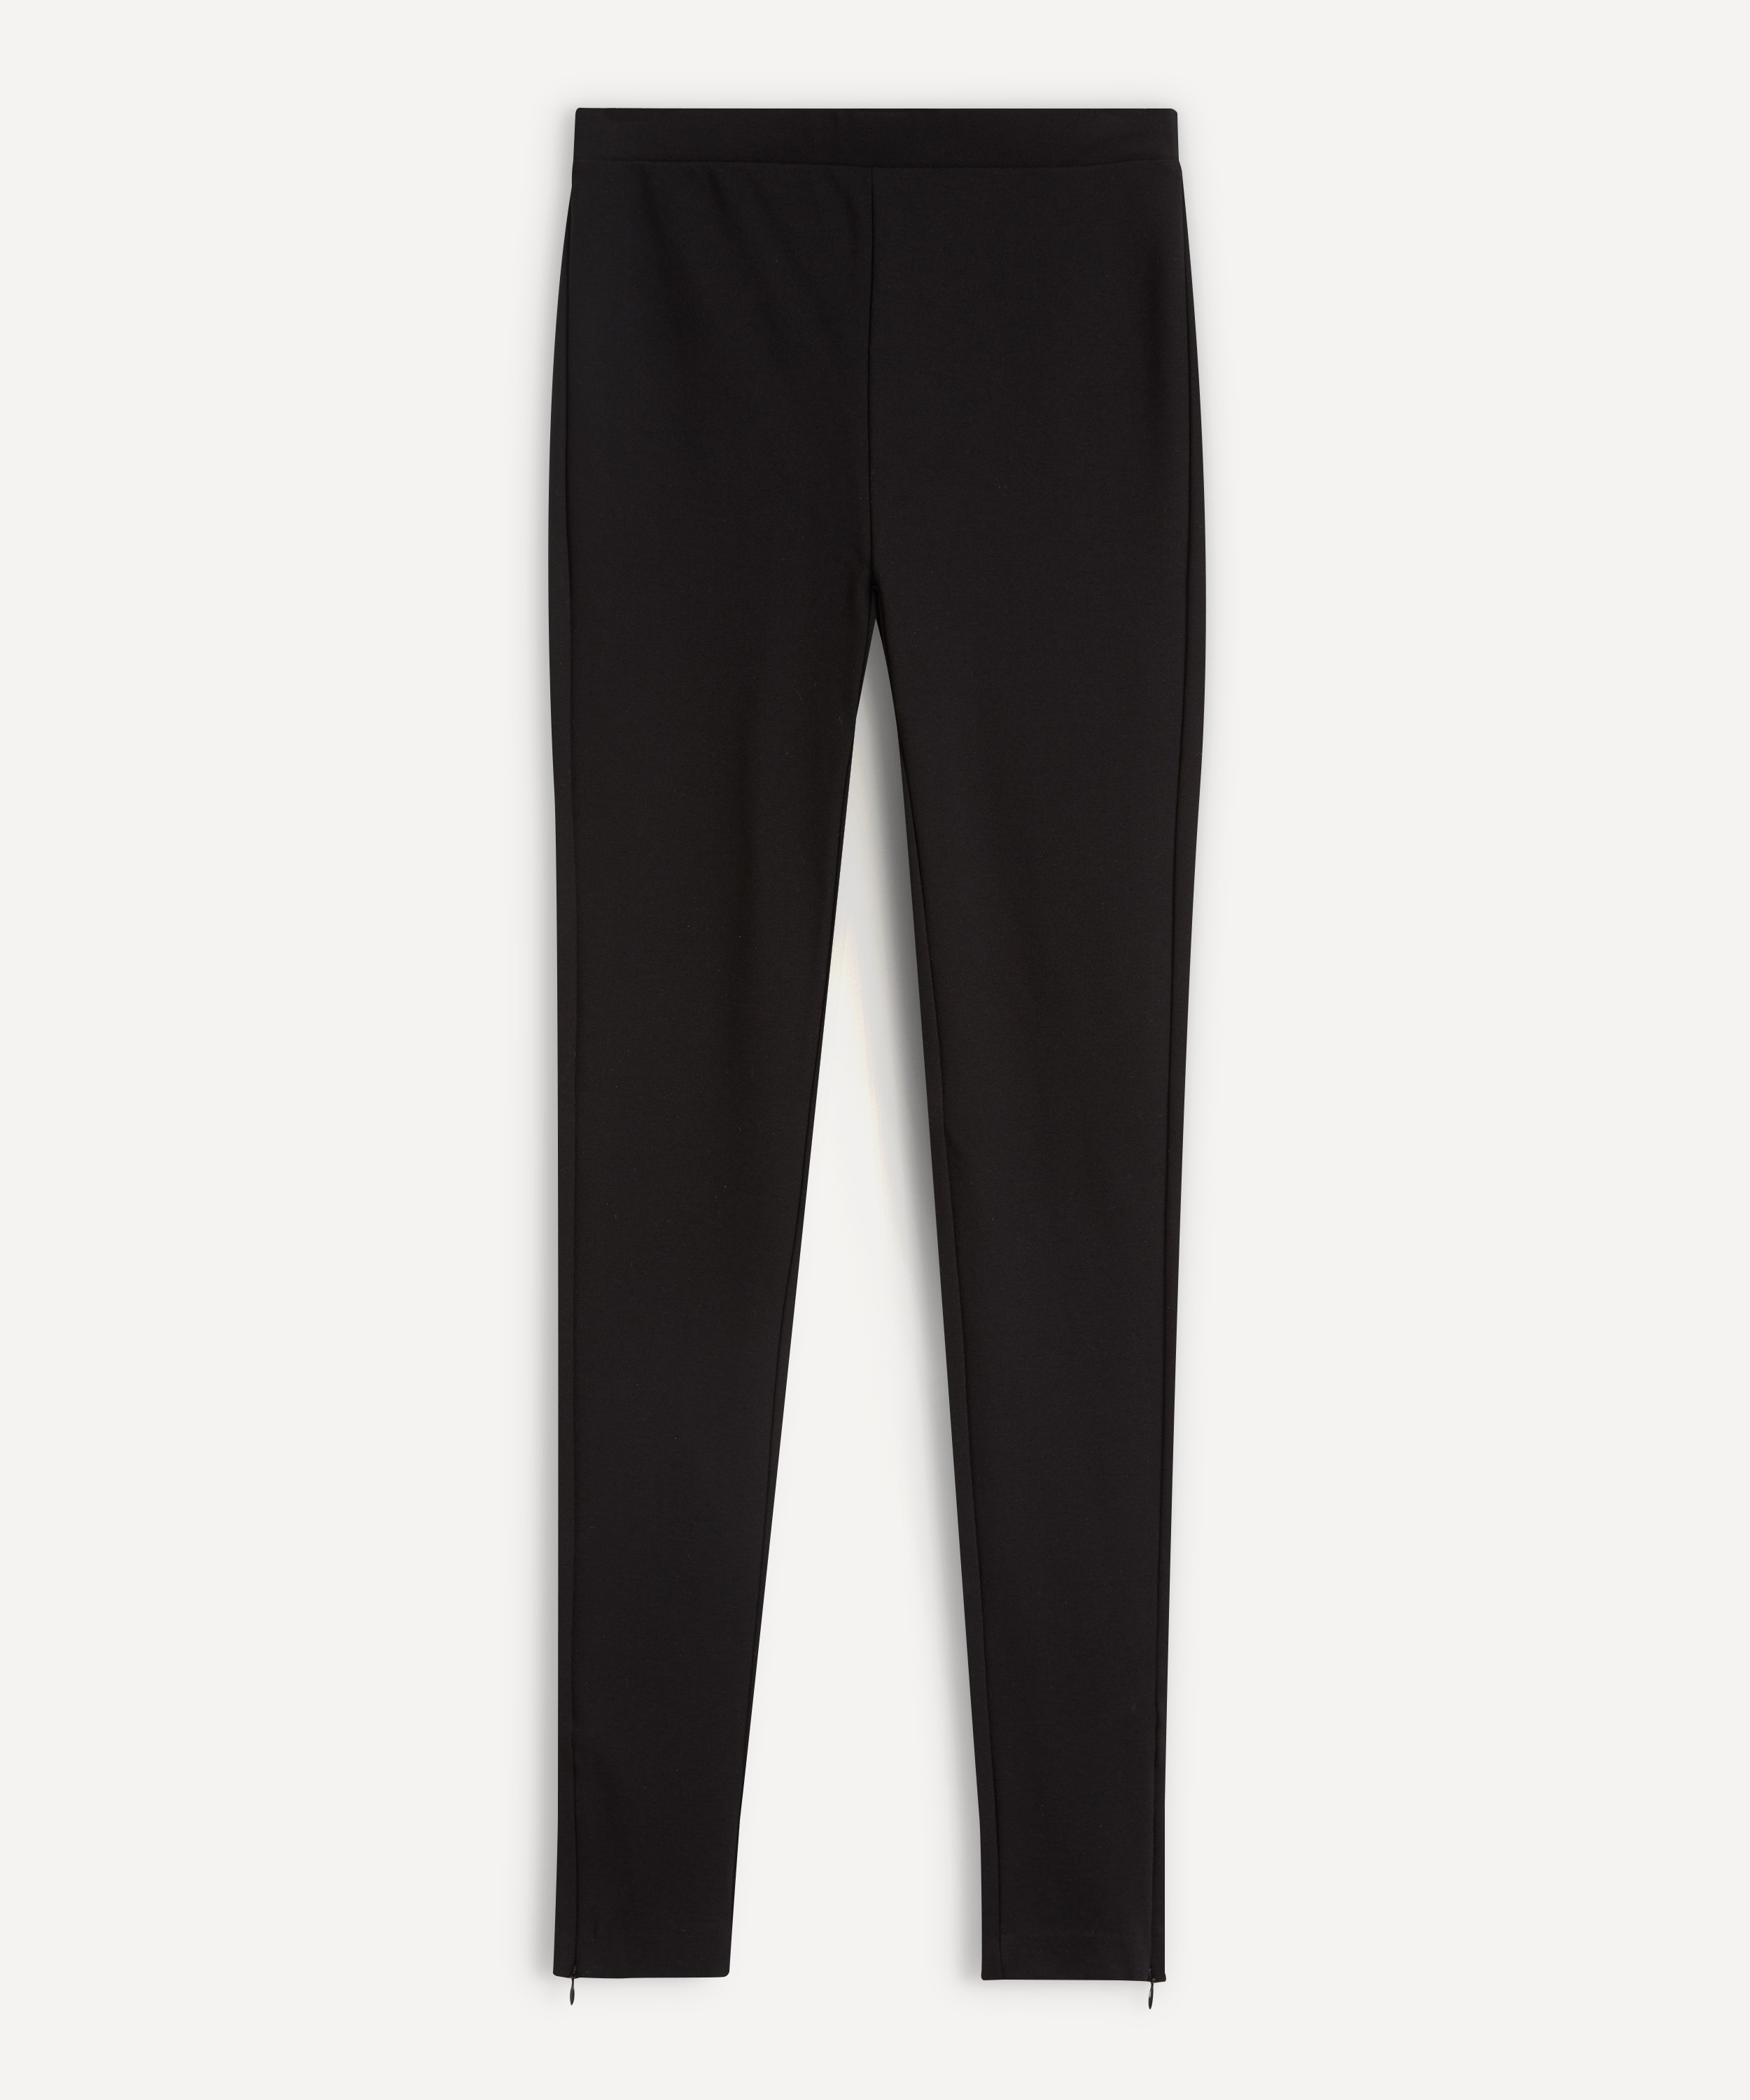 Totême High-waisted Fitted Leggings in Black